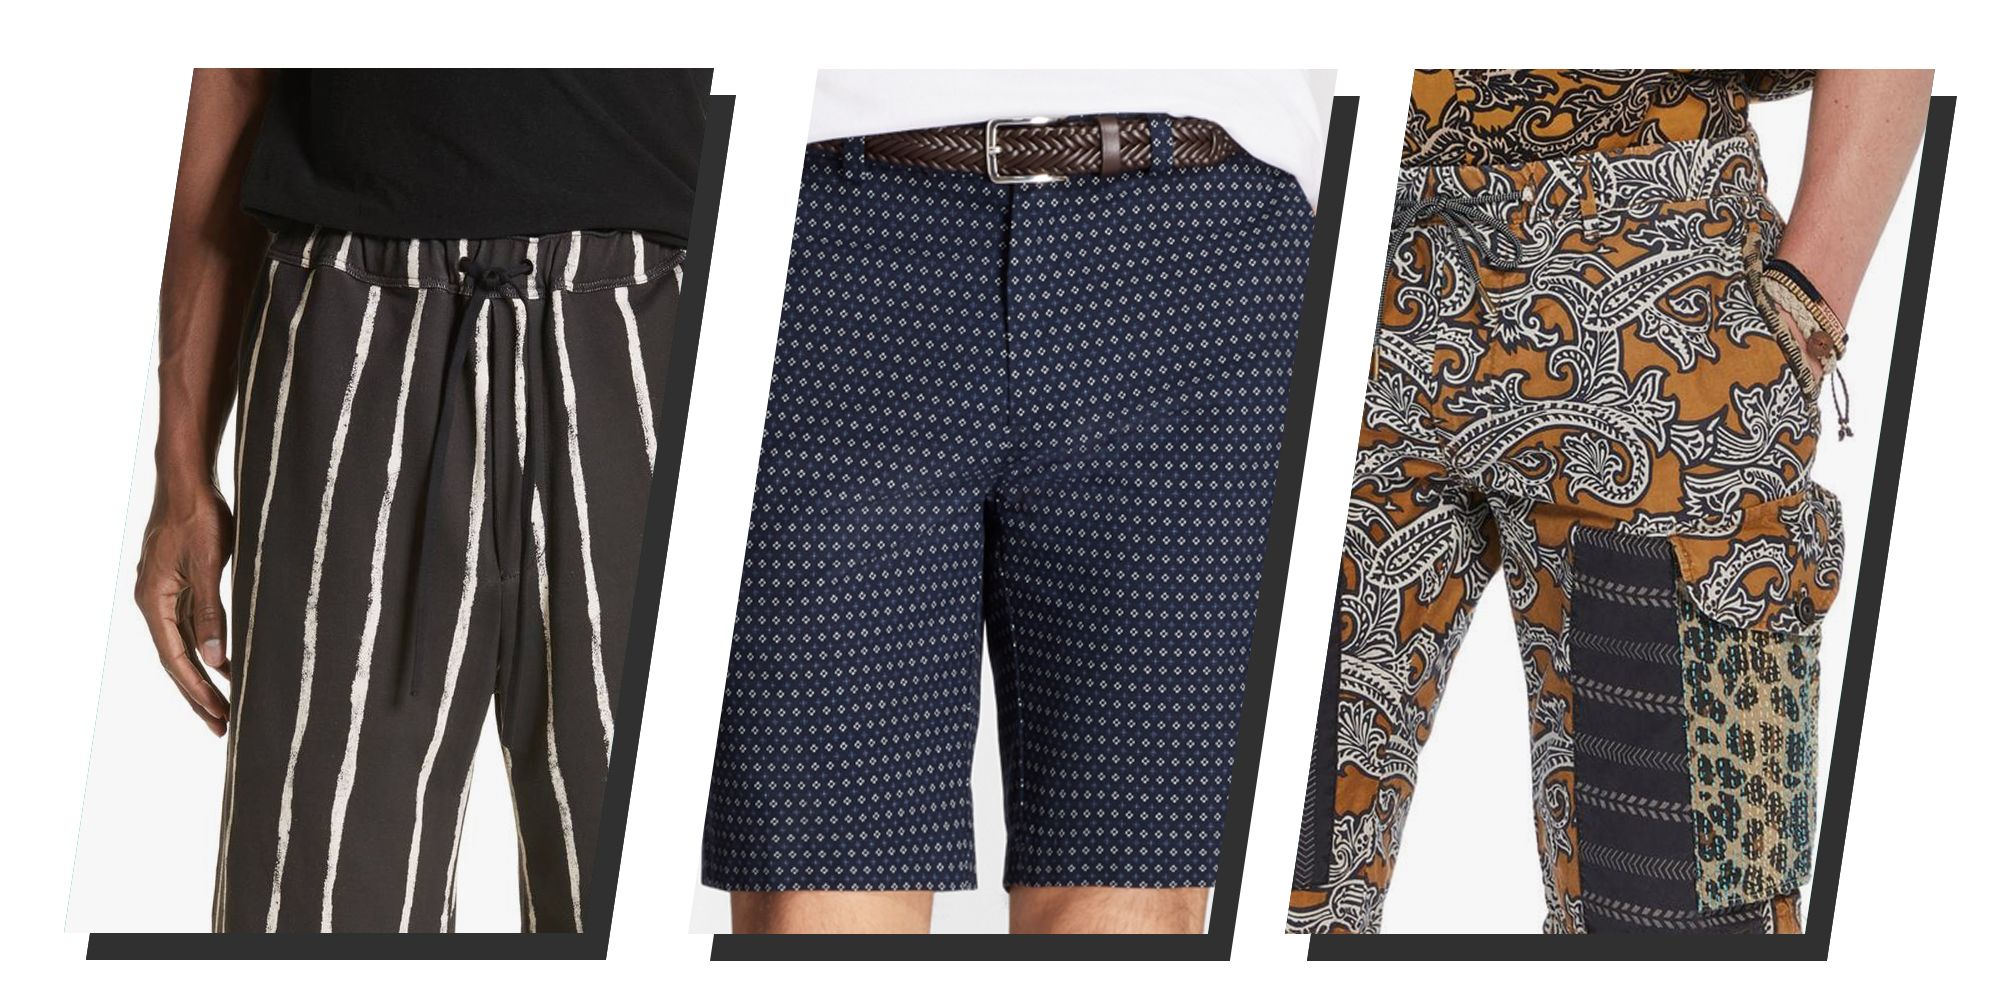 Fun Patterned Shorts for Men